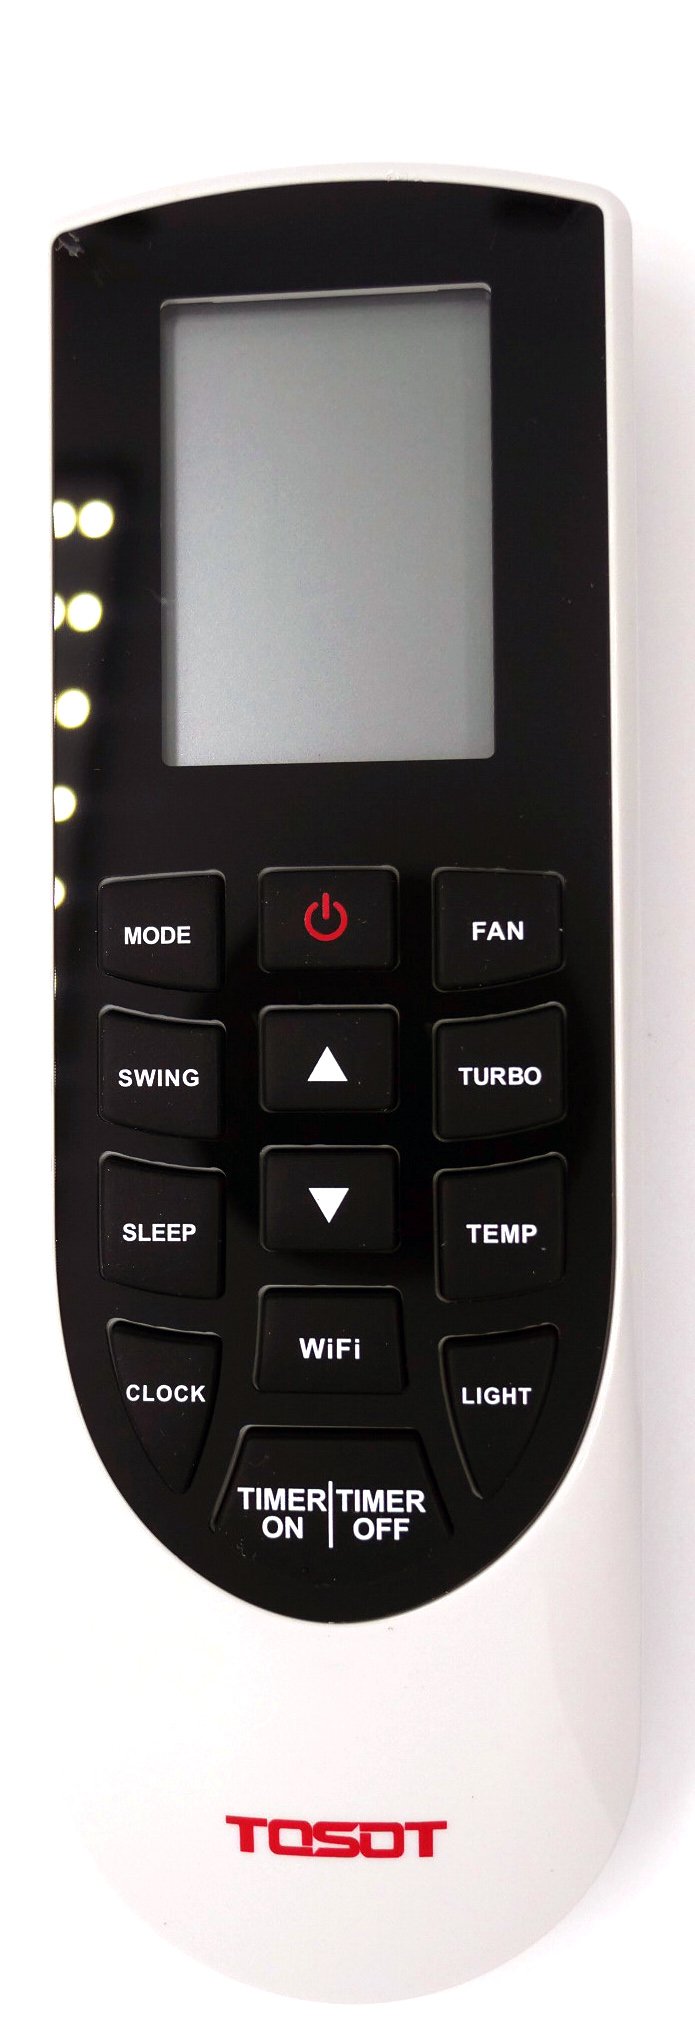 AC Remote Controller for Tosot Air Conditioner Remotes